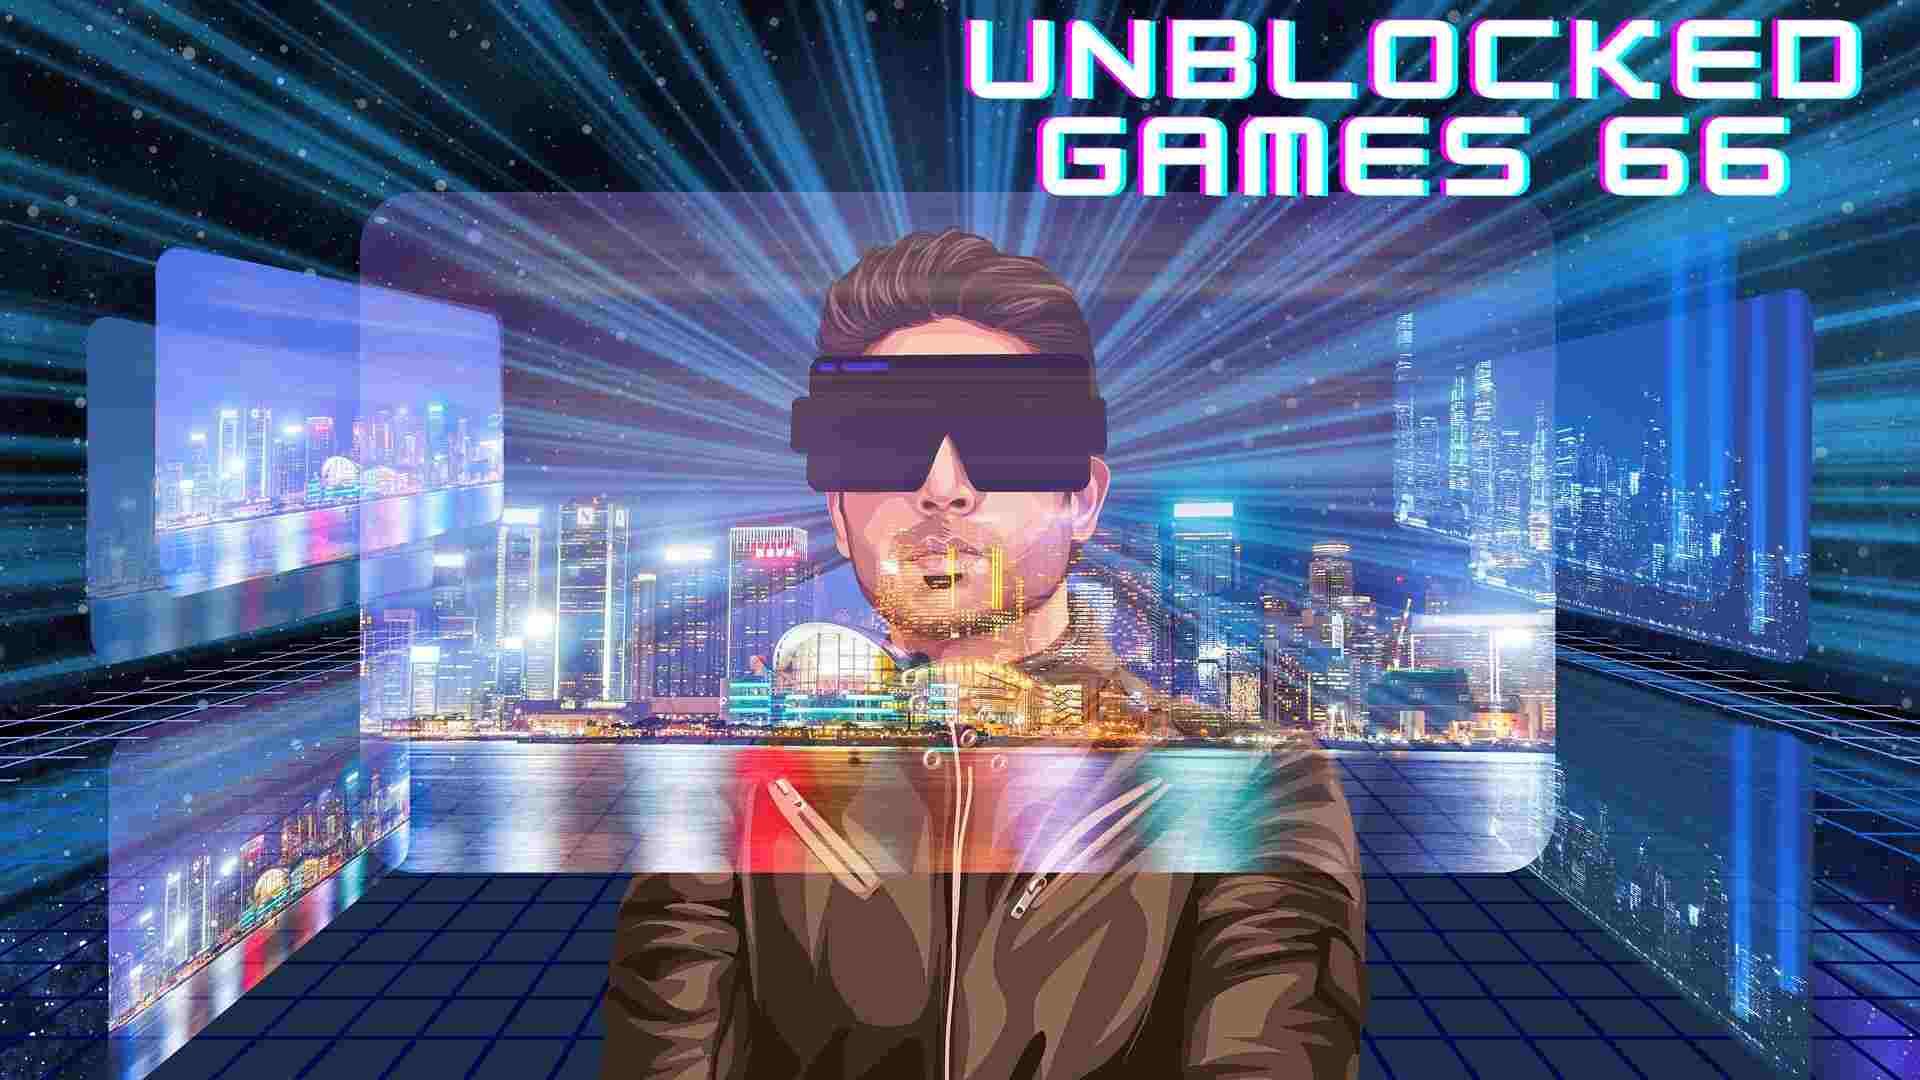 Unblocked Games
